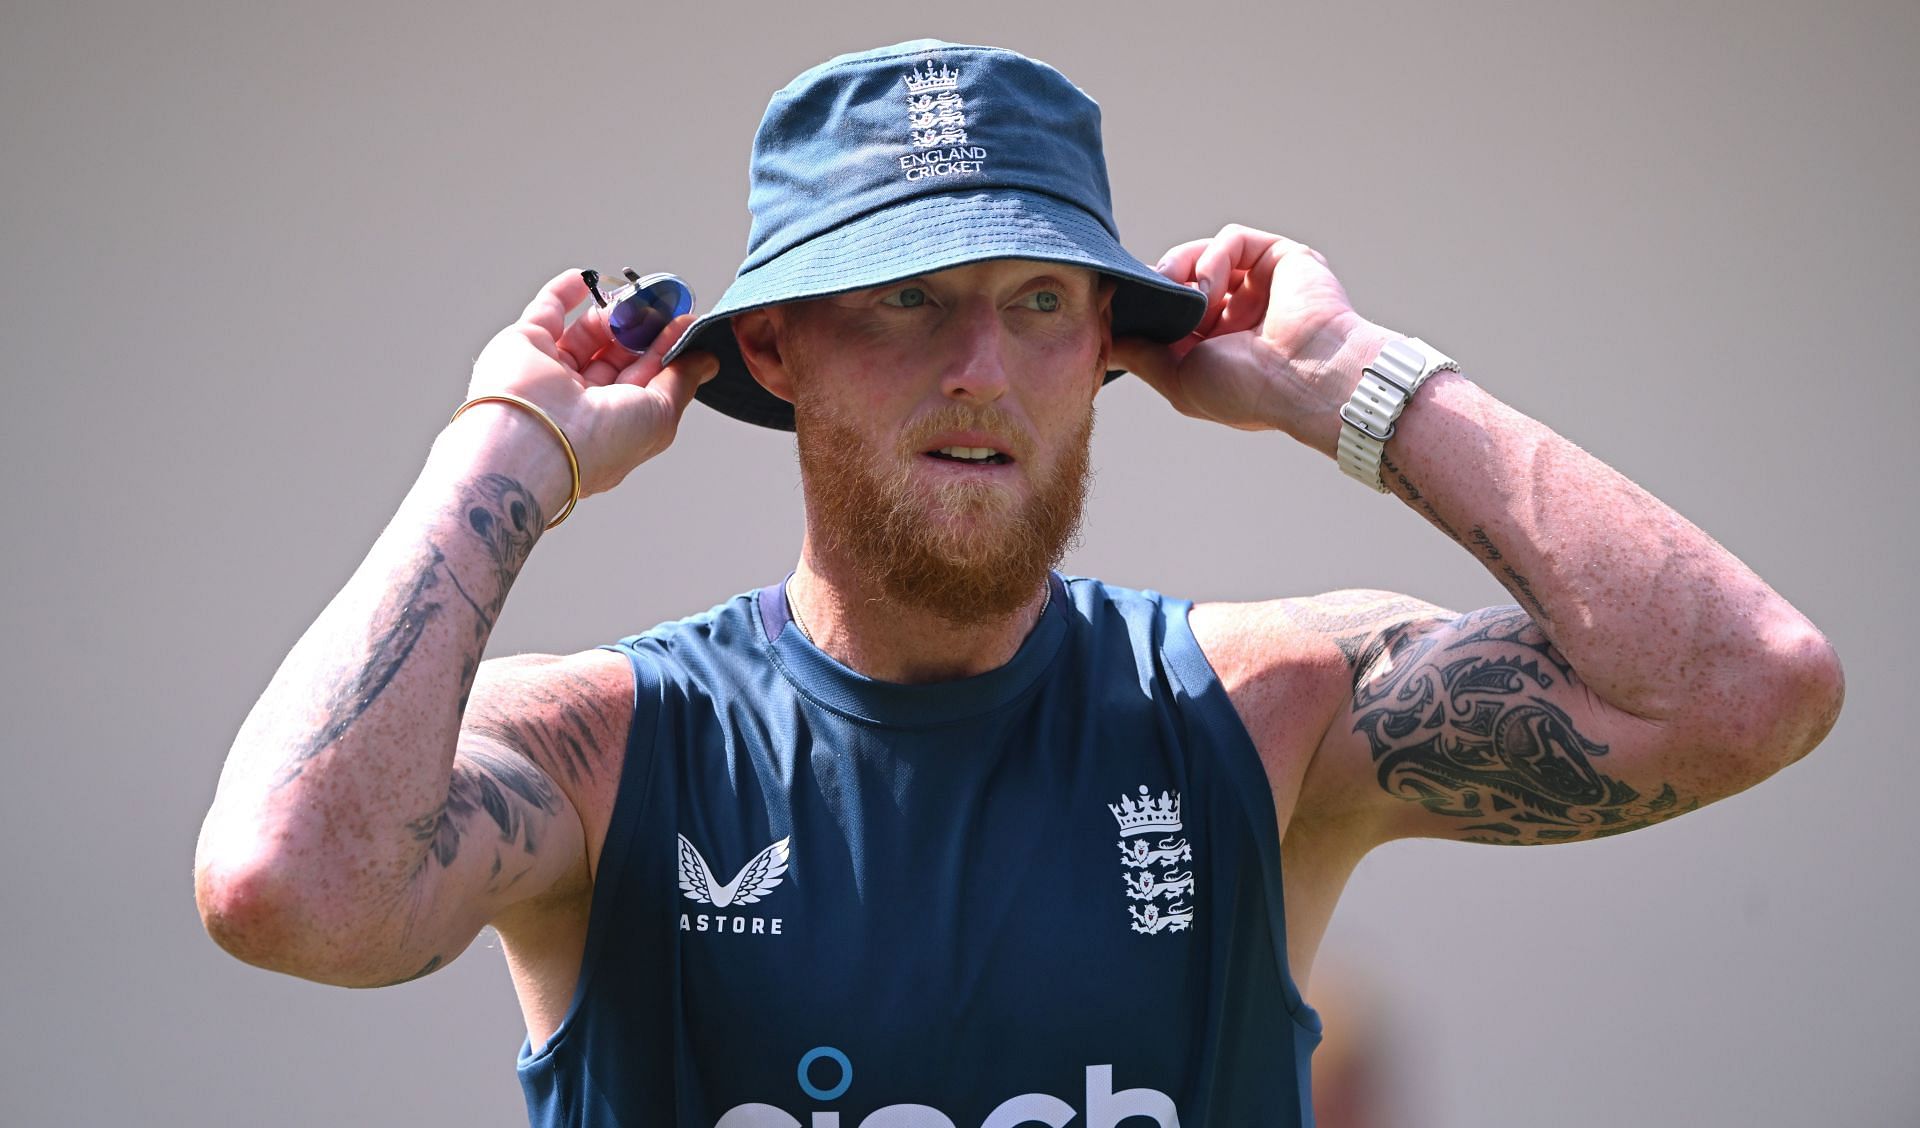 Ben Stokes has led England admirably over the last two years